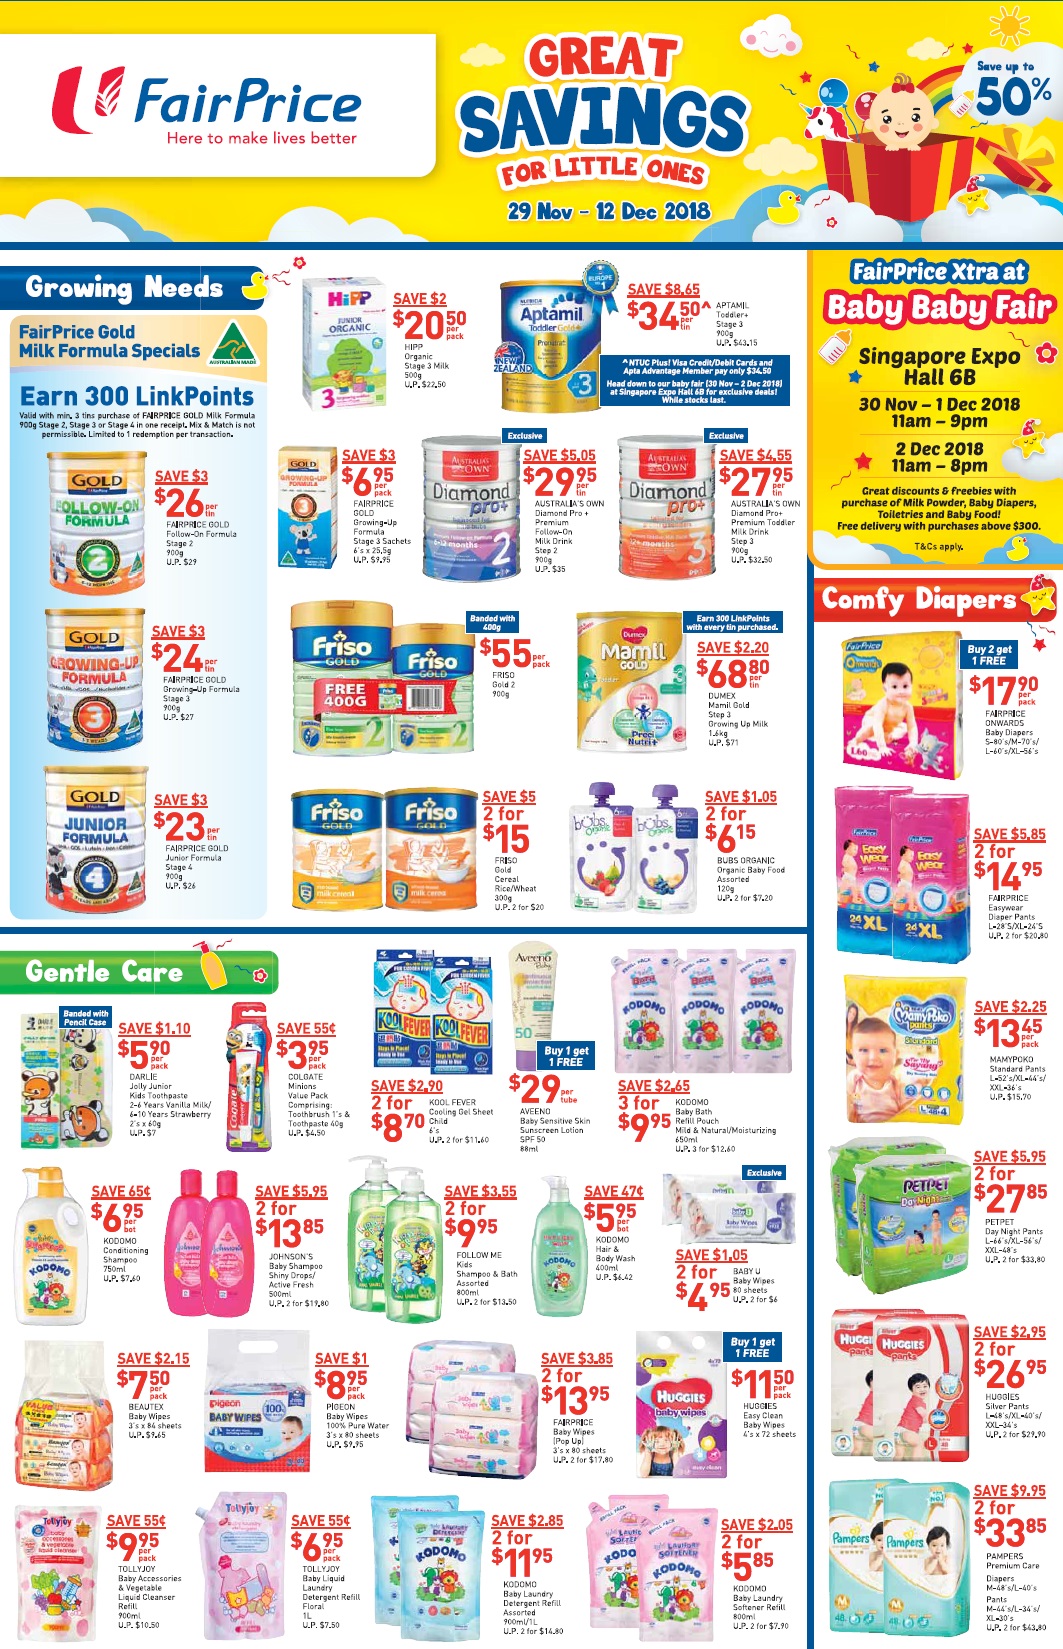 diaper promotion in Singapore-Pampers promotion,huggies promotion,merries promotion,drypers promotion,mamypoko promotion and petpet promotion